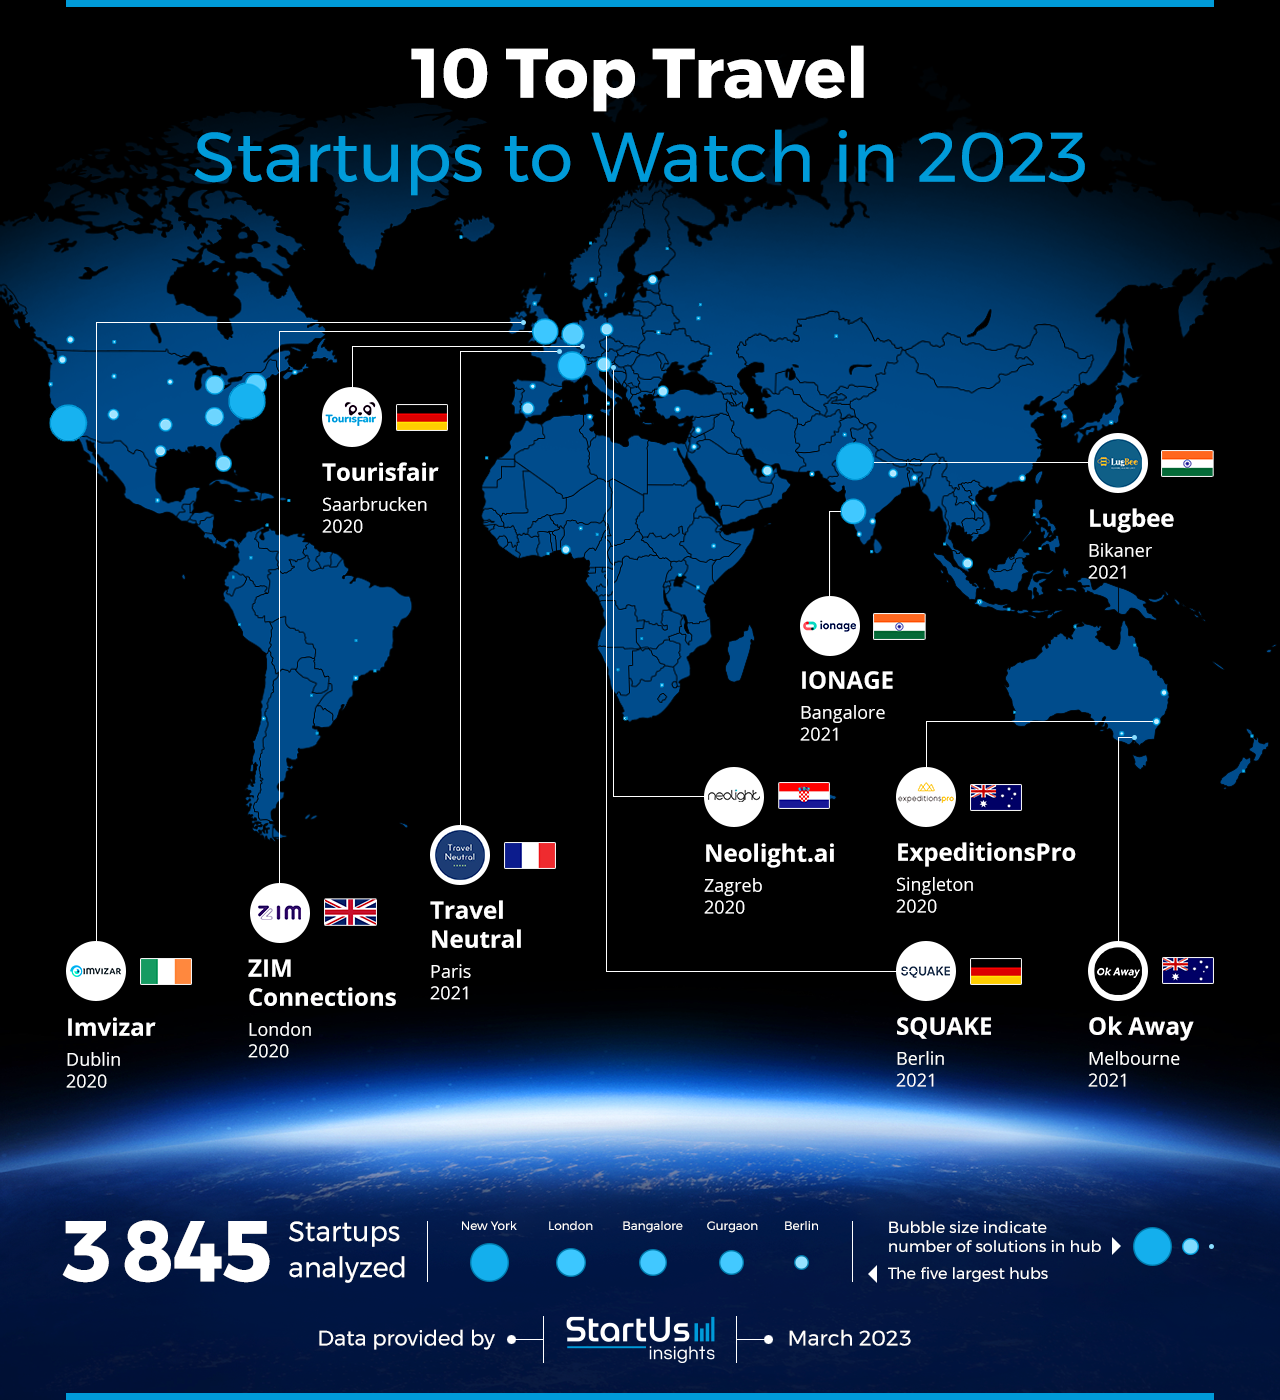 10 Top Travel Startups to Watch in 2023 | StartUs Insights